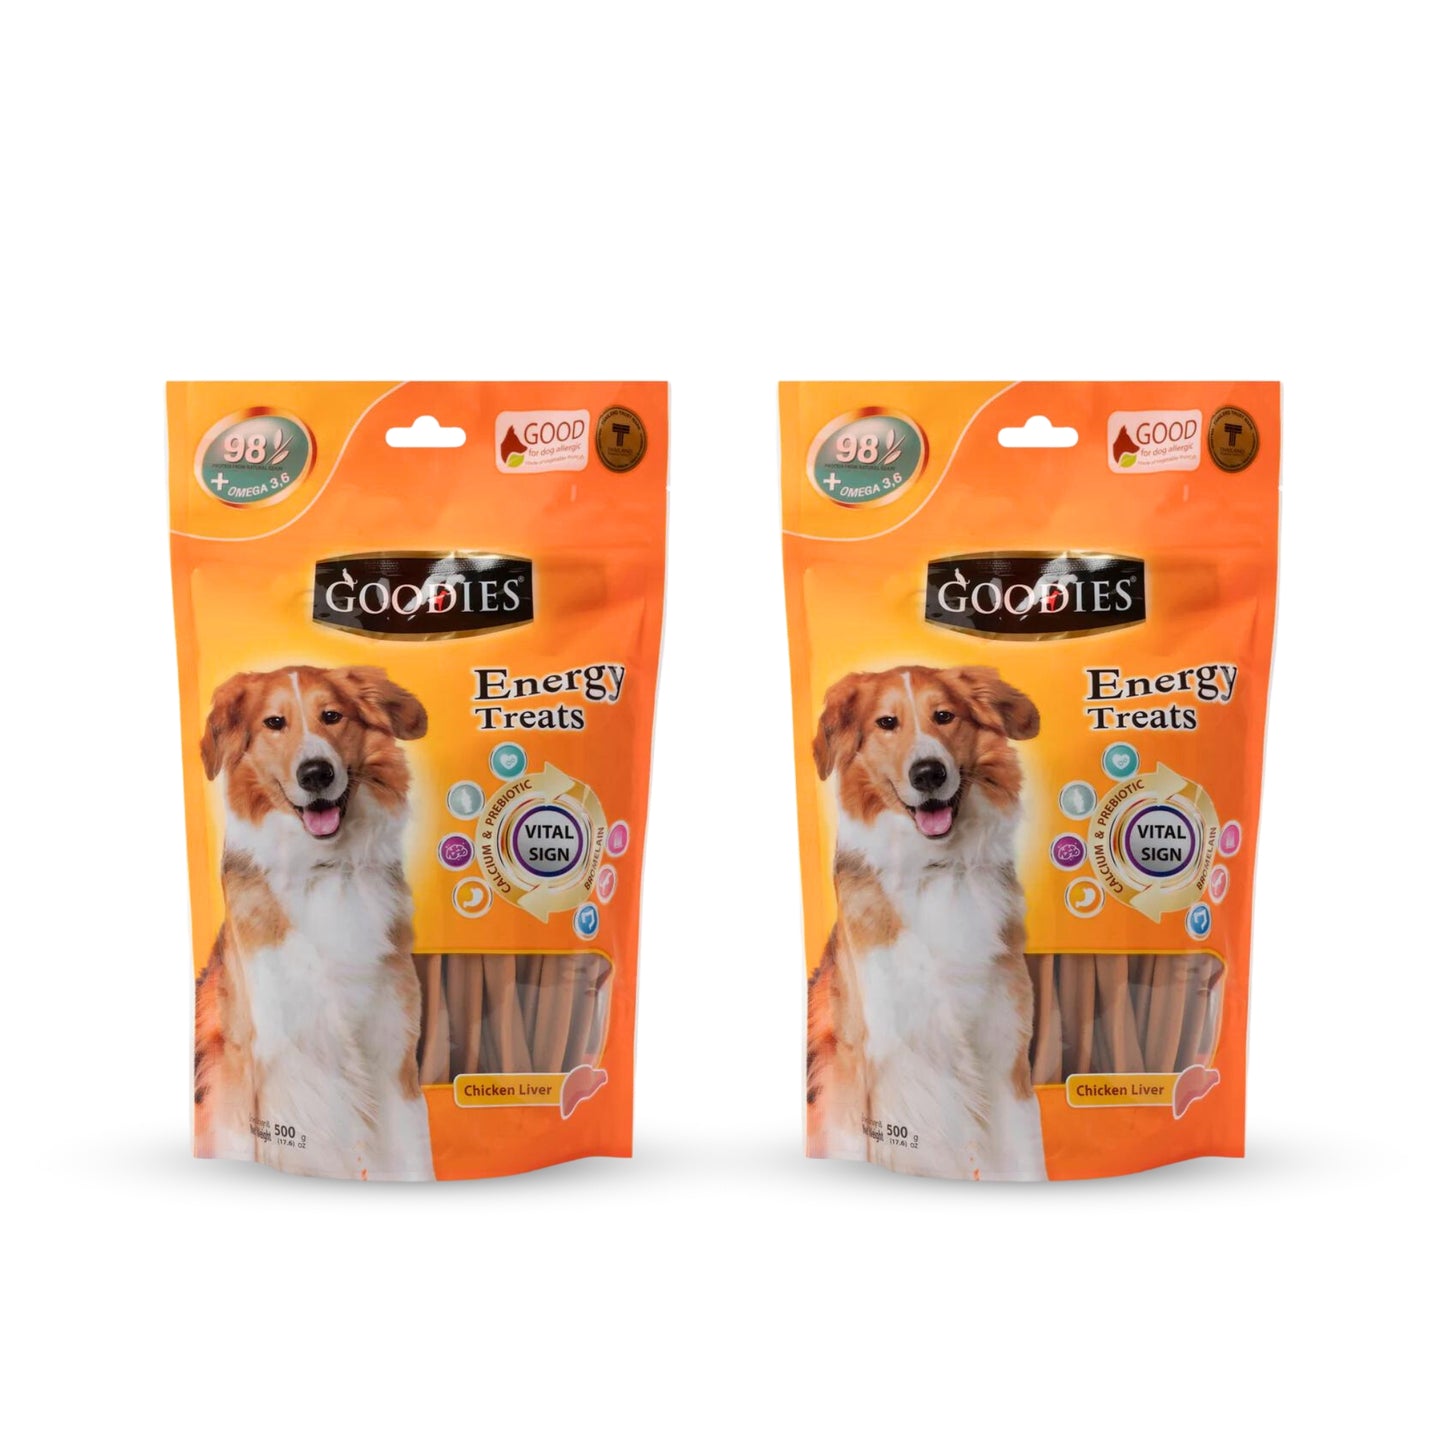 Goodies Energy Dog Treats Chicken Liver - 500gm, Pack of 2